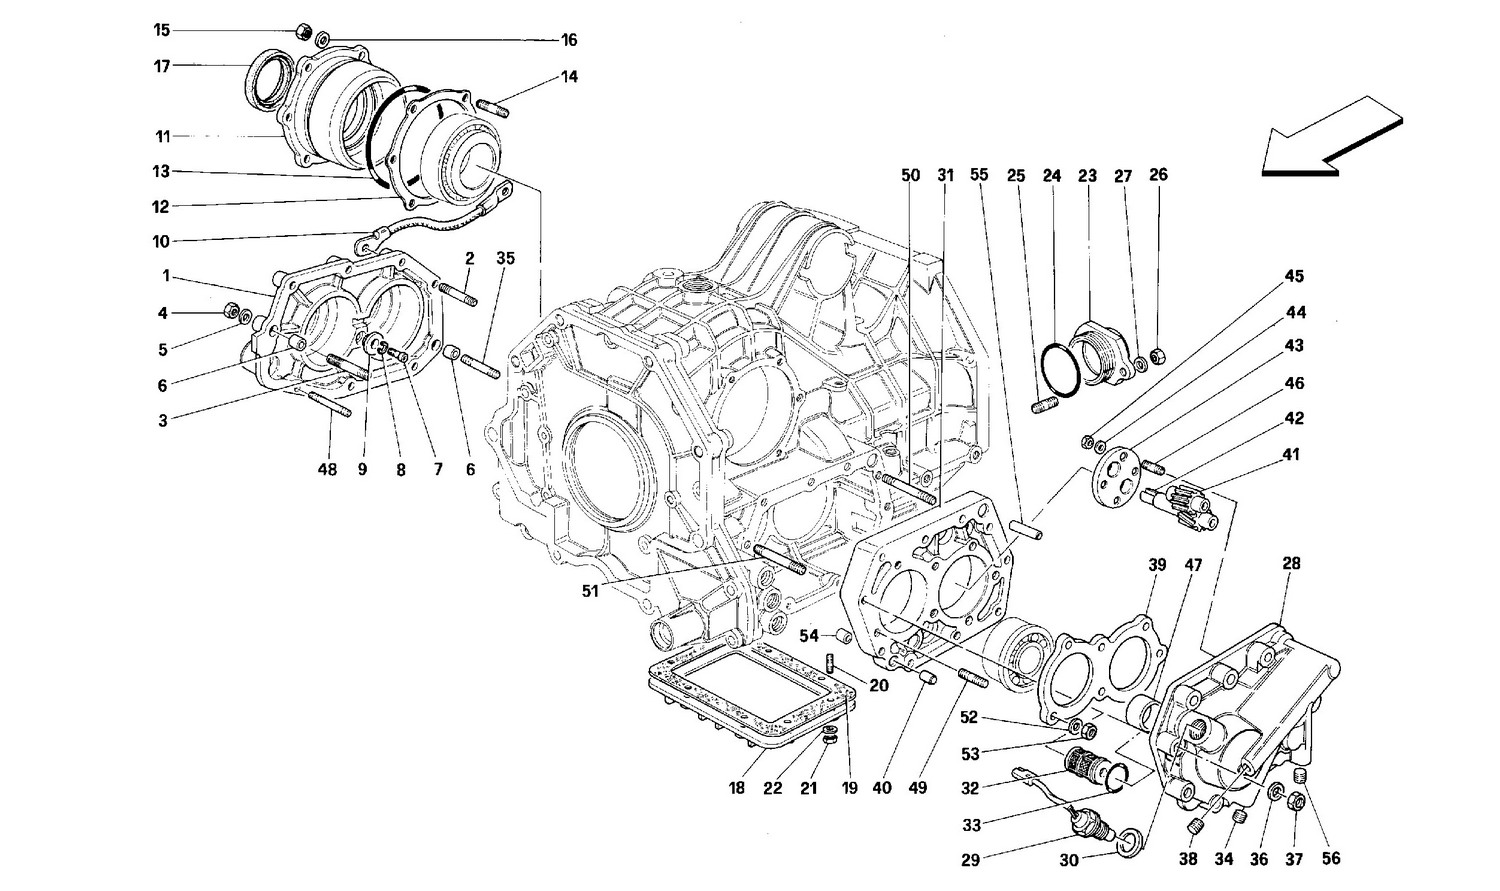 Schematic: Gearbox Covers